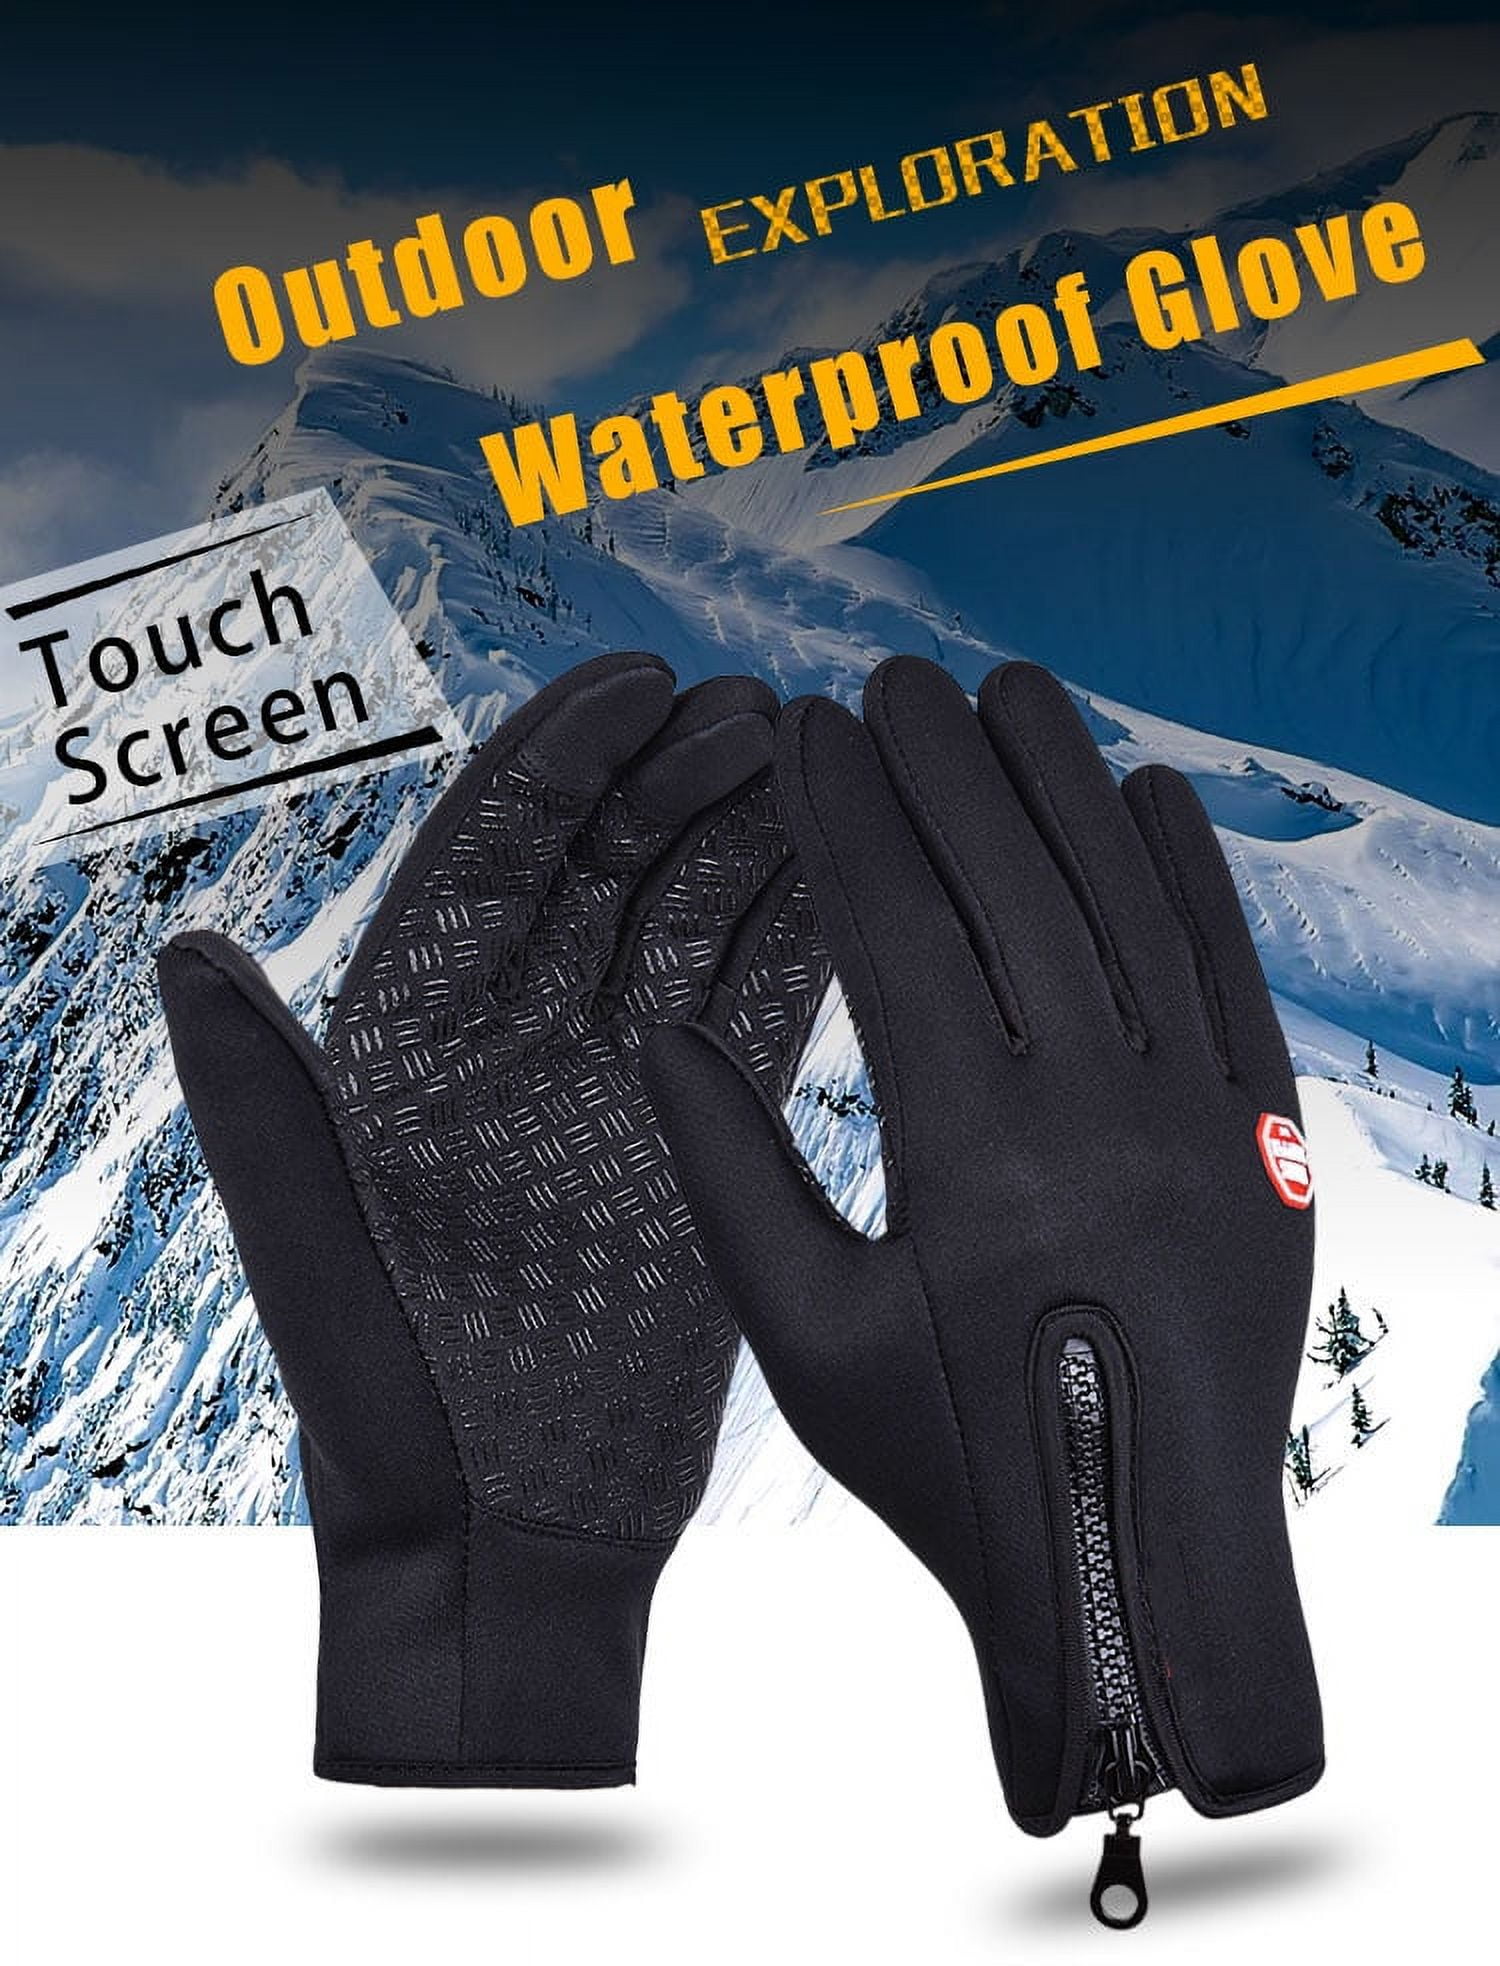 Work Gloves for Men and Women,Touchscreen Working Gloves with Grip,12 Pairs  Bulk